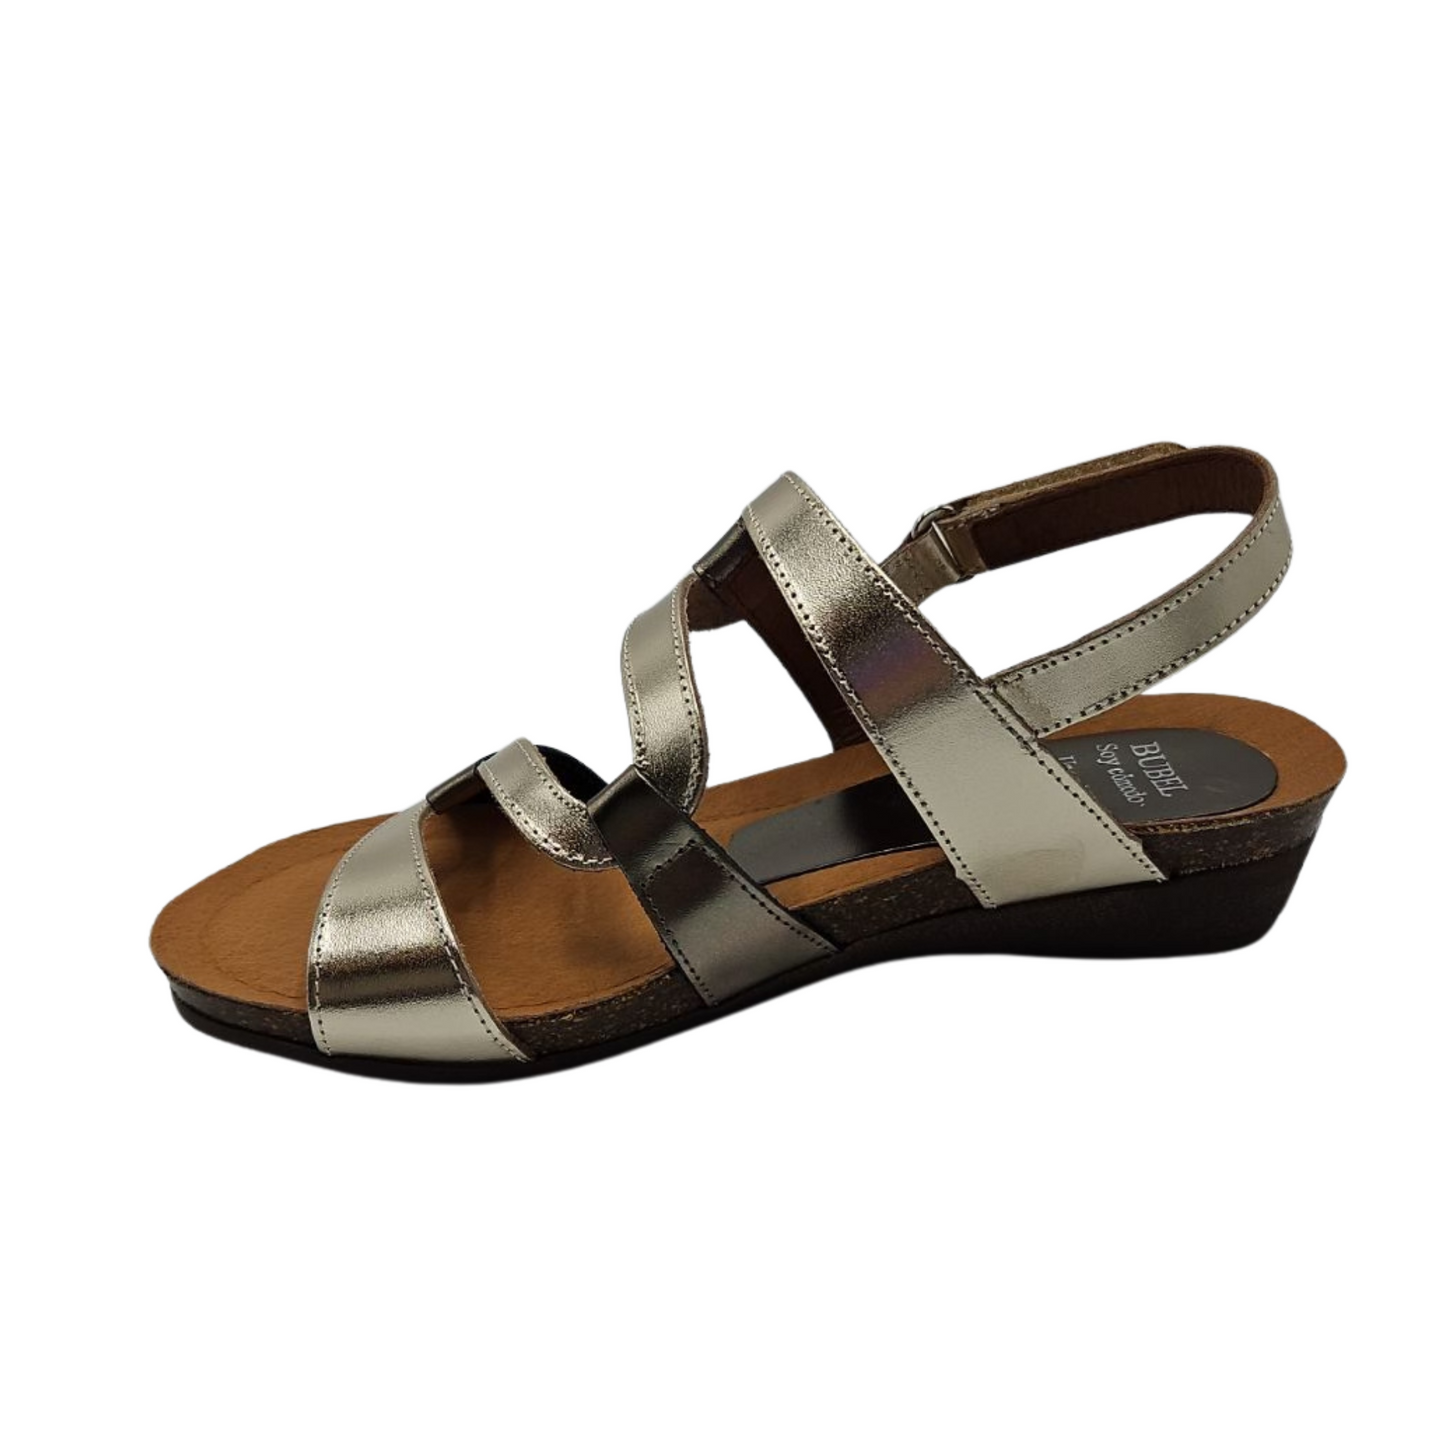 Left facing  view of metallic leather sandal with wavy strap design, rounded toe and slight wedge heel.